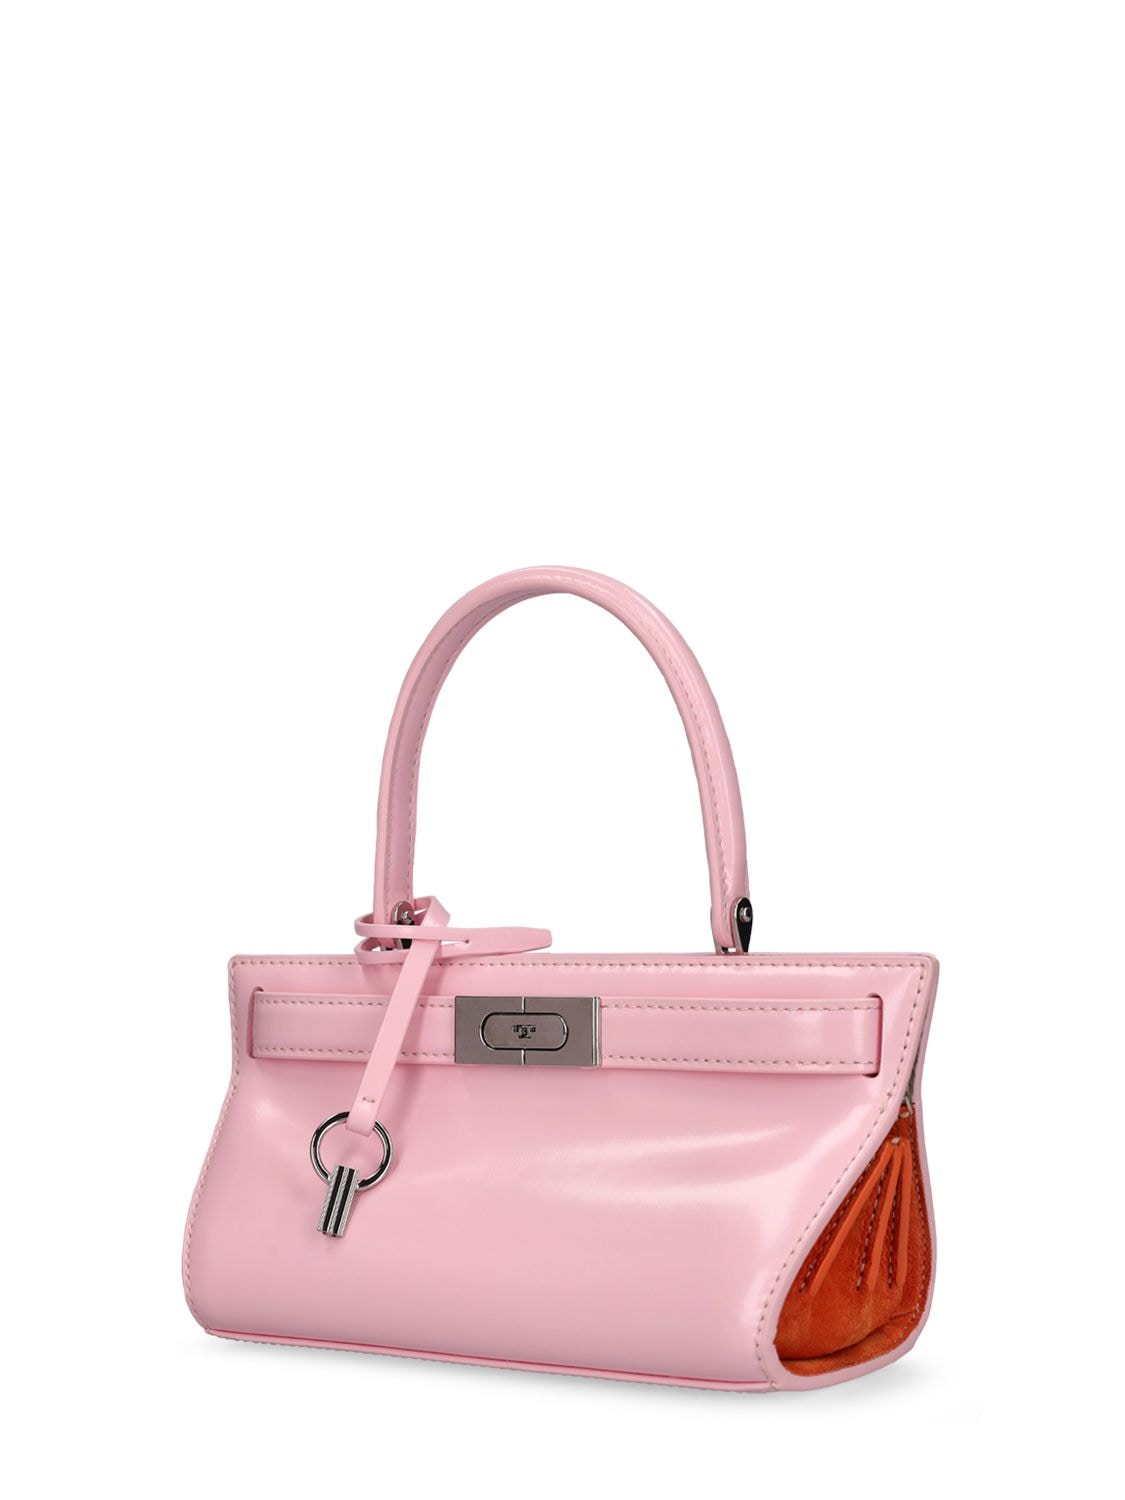 Tory Burch Petite Lee Radziwill Leather Bag In Pink Plie | ModeSens